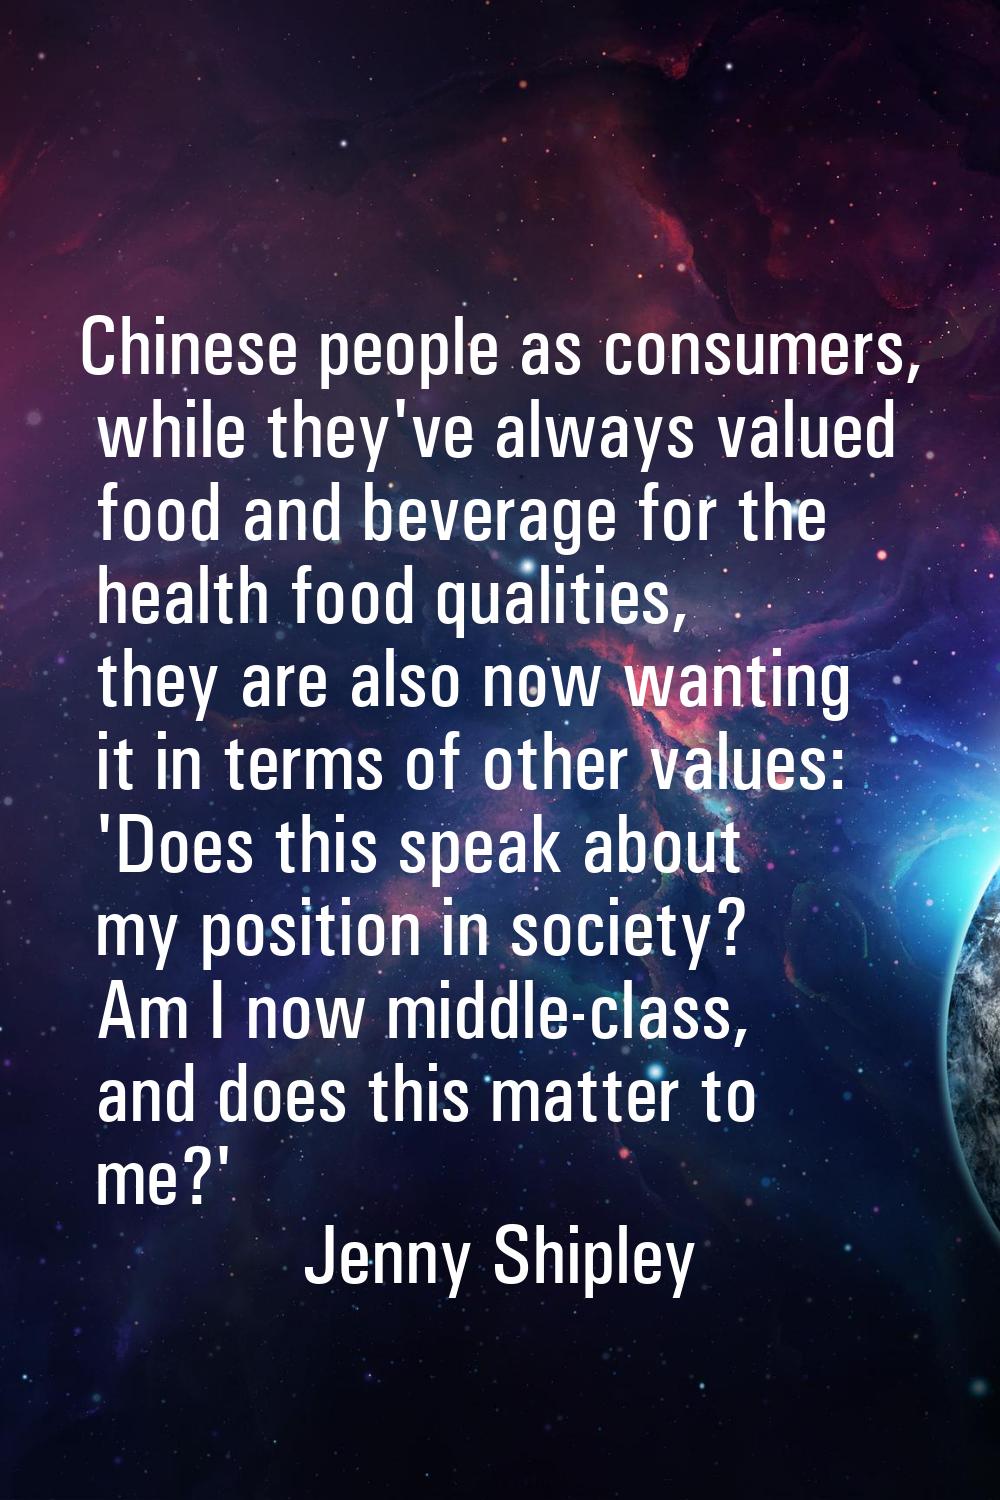 Chinese people as consumers, while they've always valued food and beverage for the health food qual